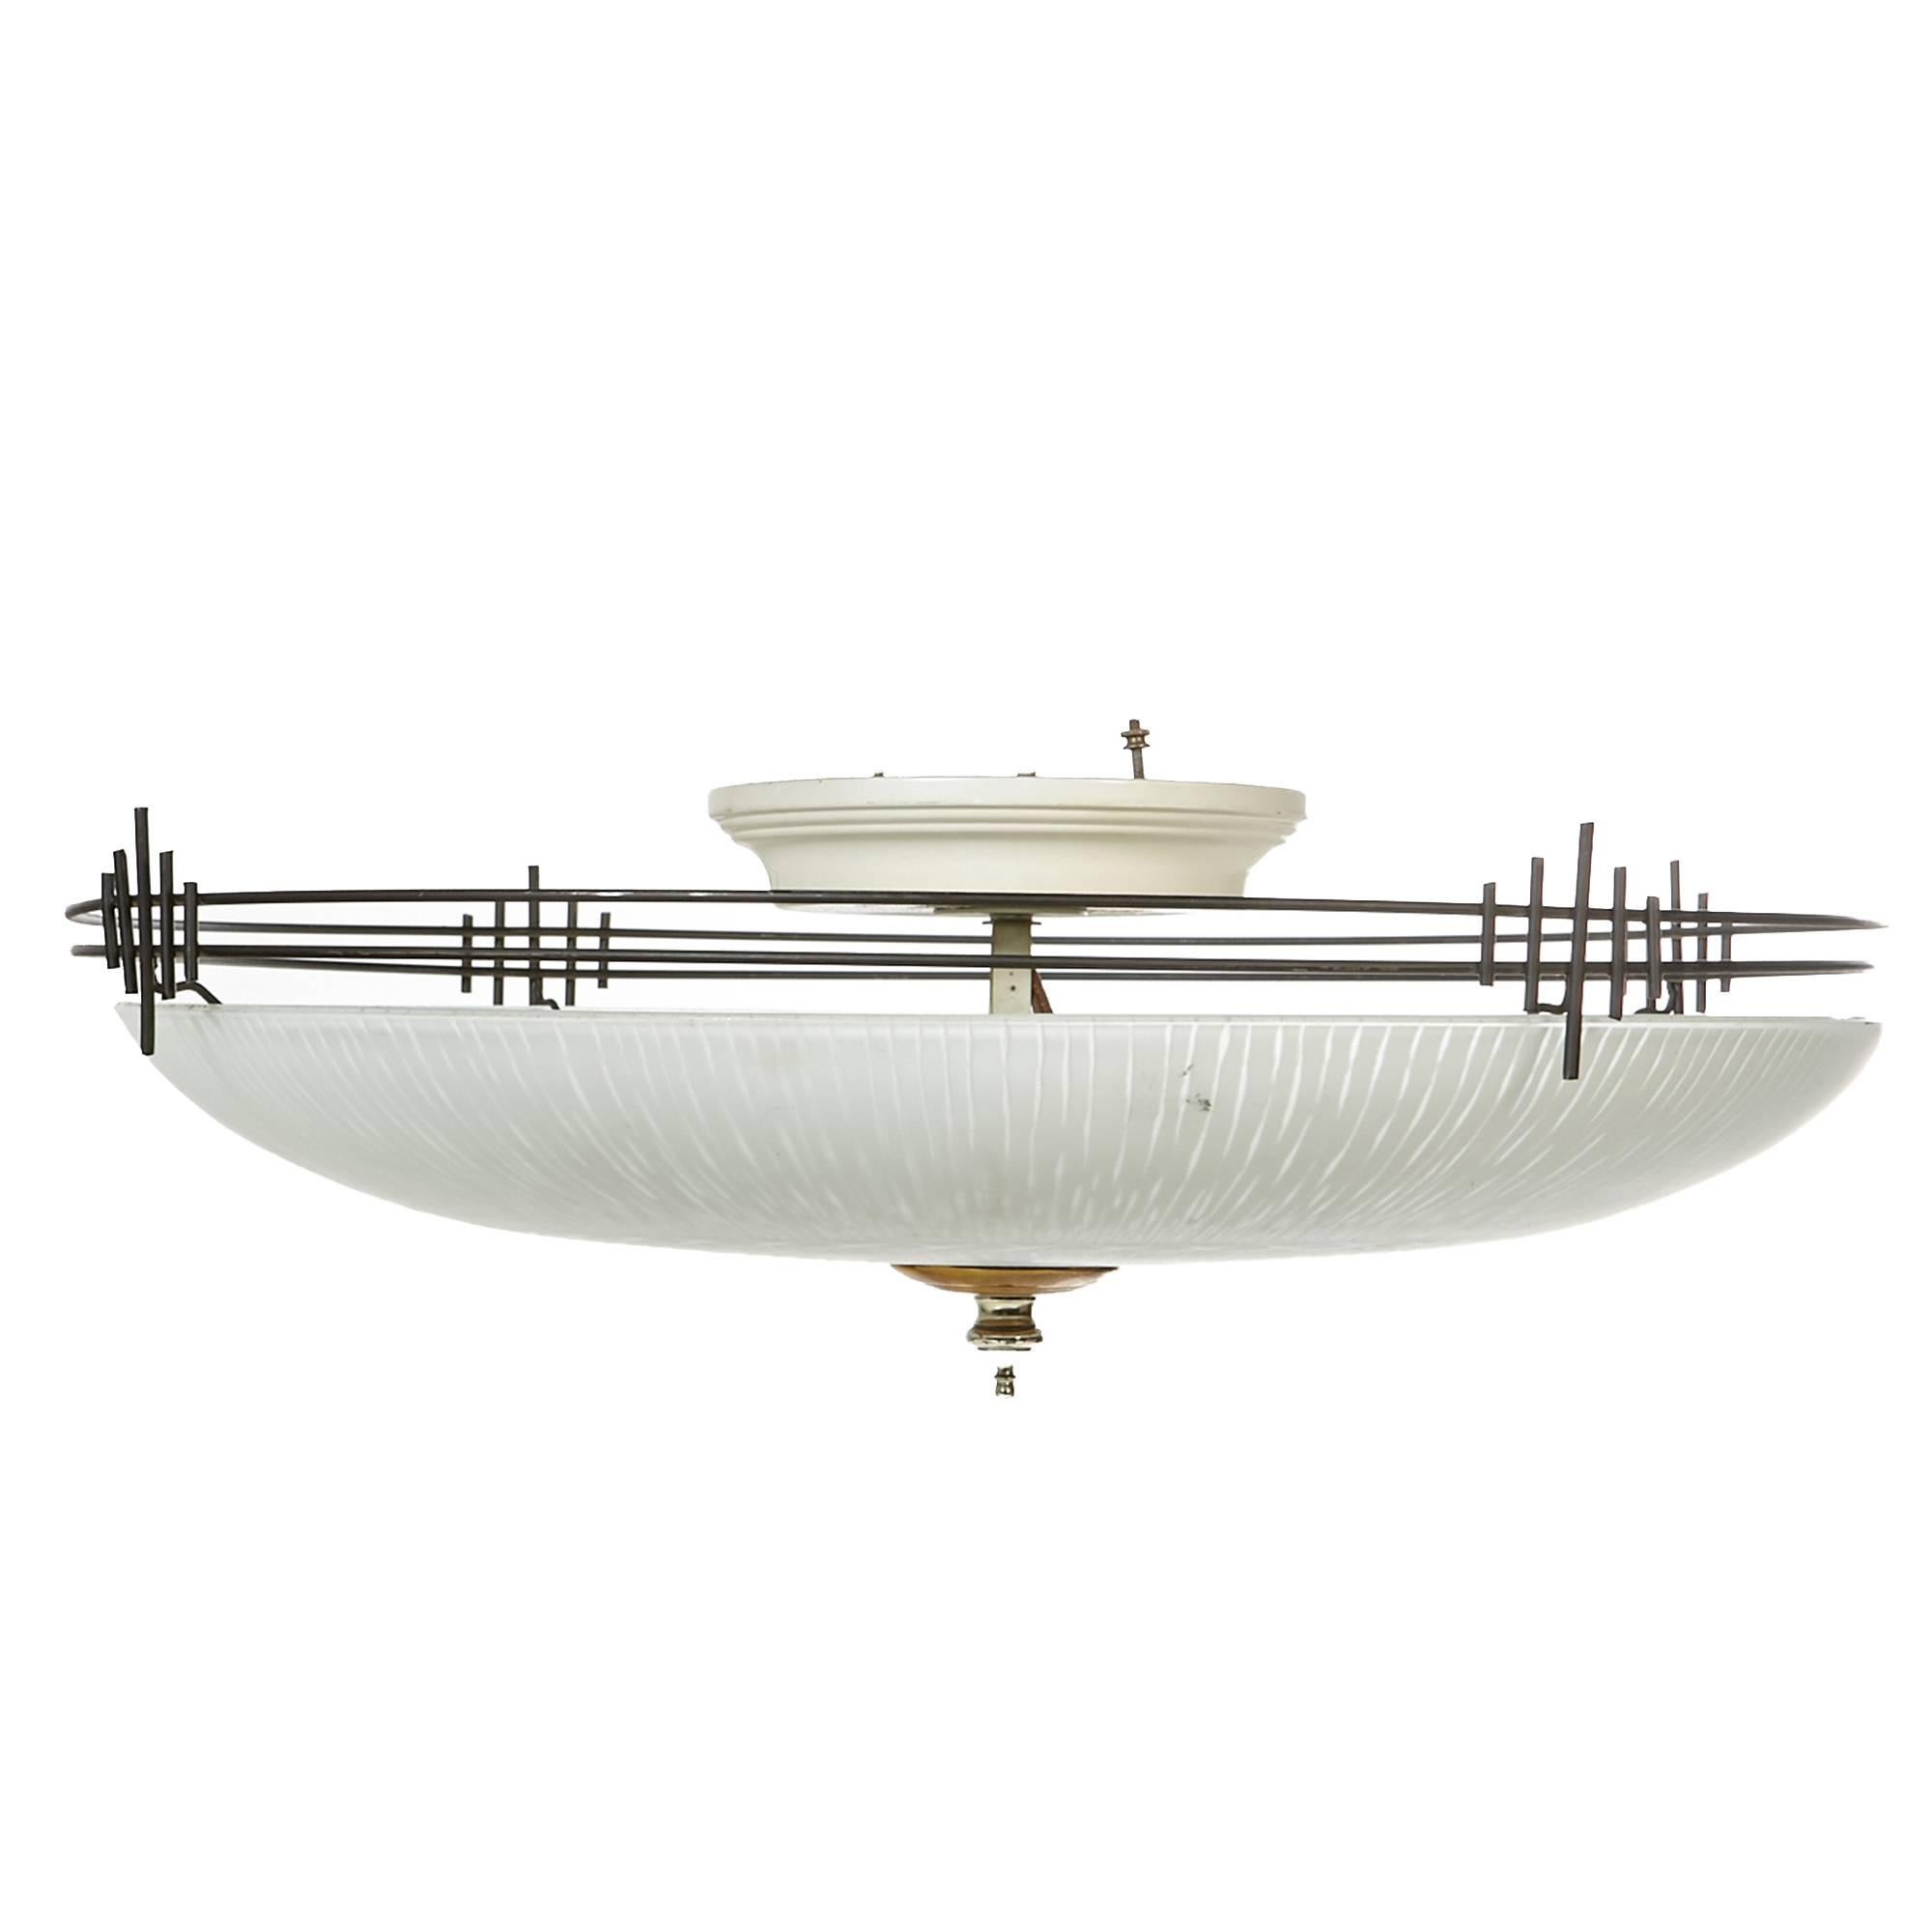 Art Deco style large black metal designed flush ceiling mount light with frosted glass shade. Hard wired for the US. Holds four standard US light bulbs, 75W max ea. Unmarked.